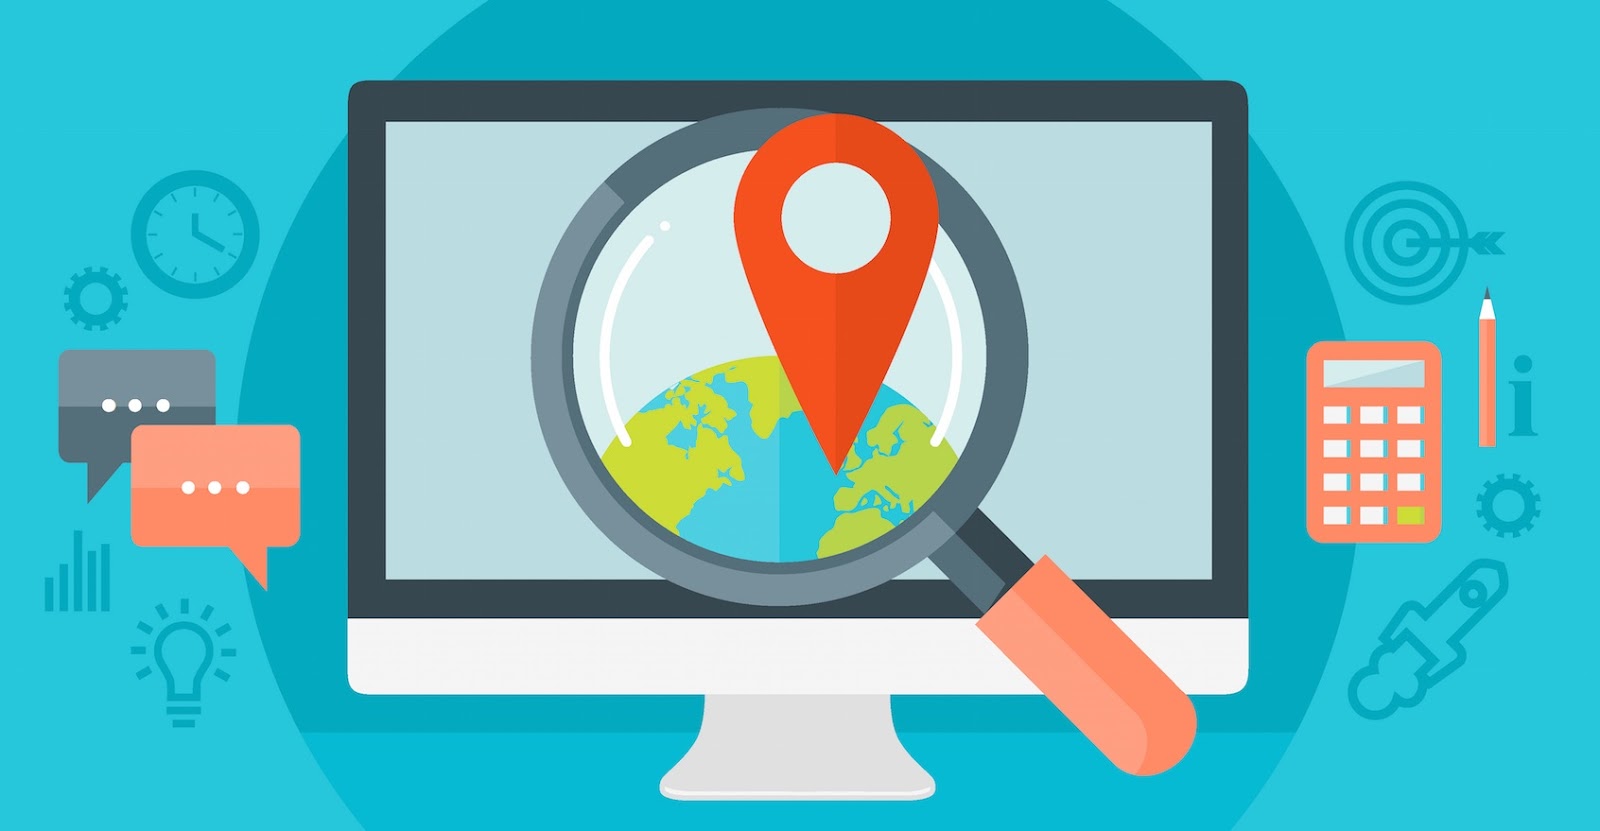 Other Google Maps marketing and local SEO tips